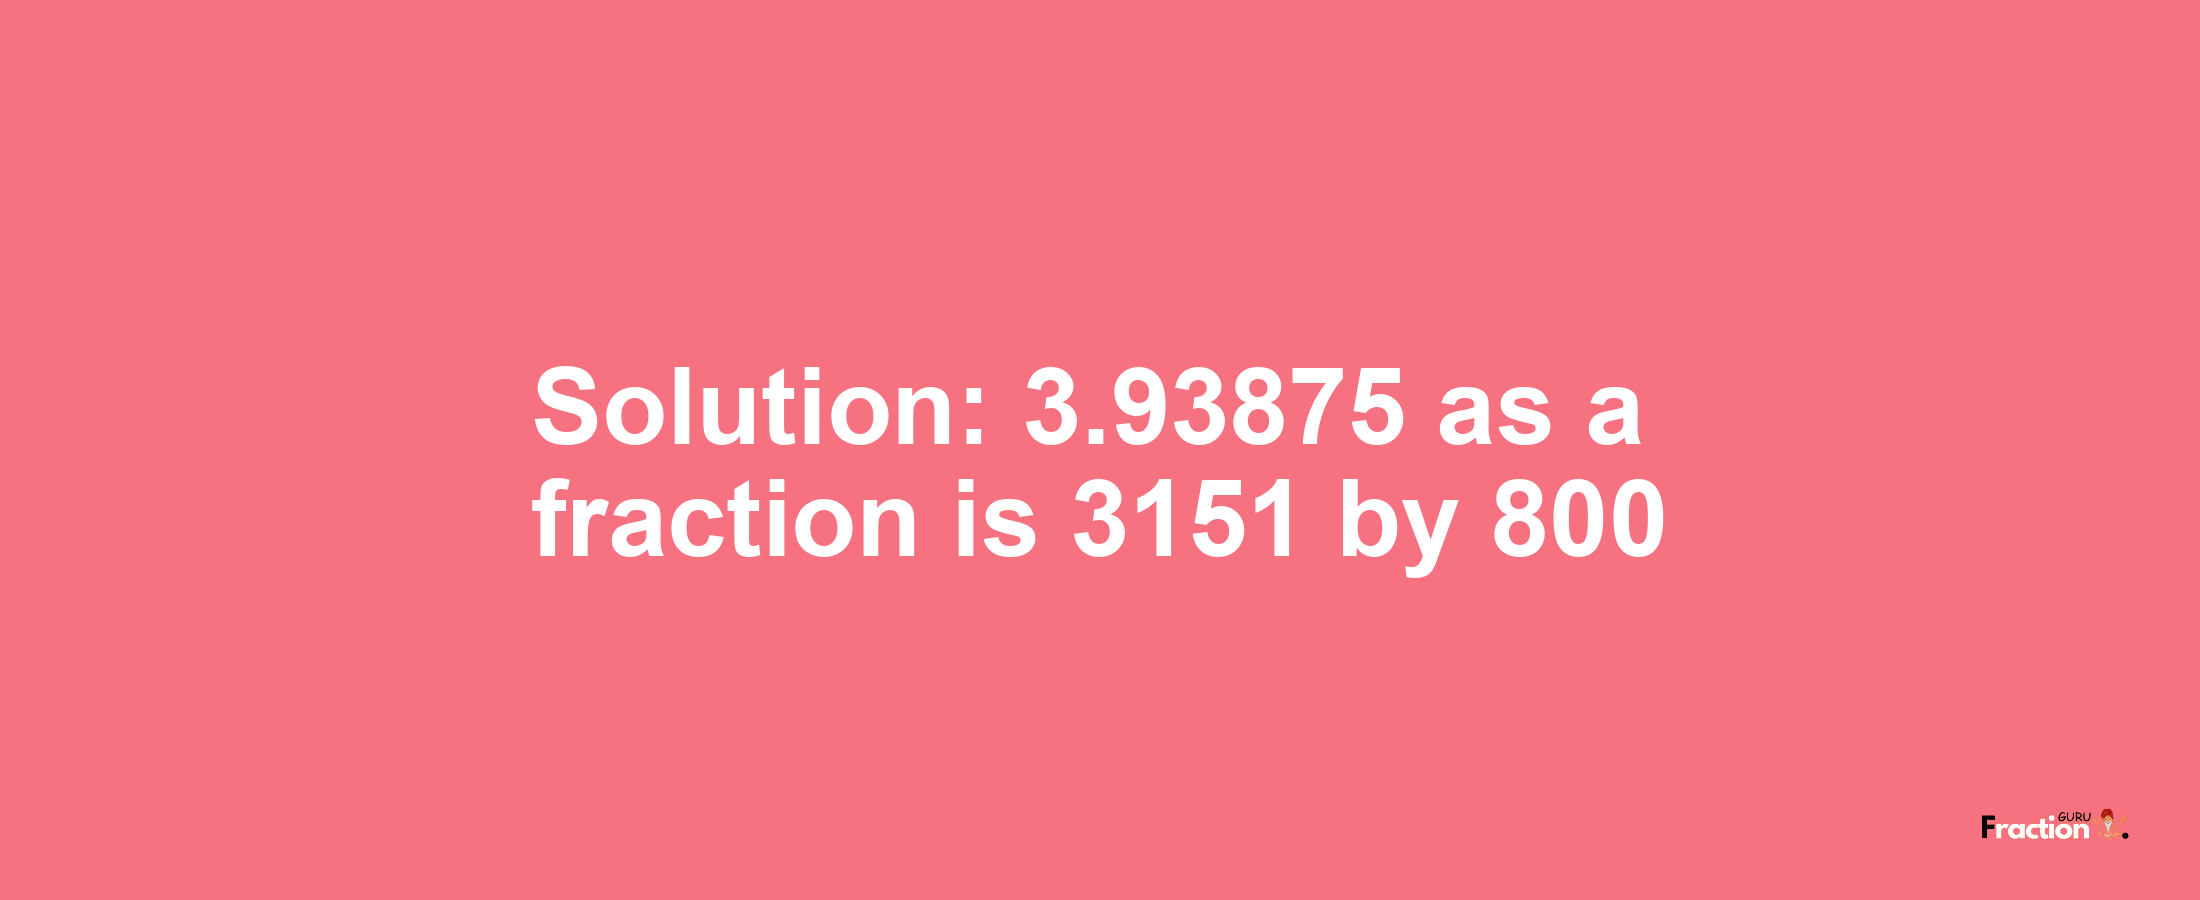 Solution:3.93875 as a fraction is 3151/800